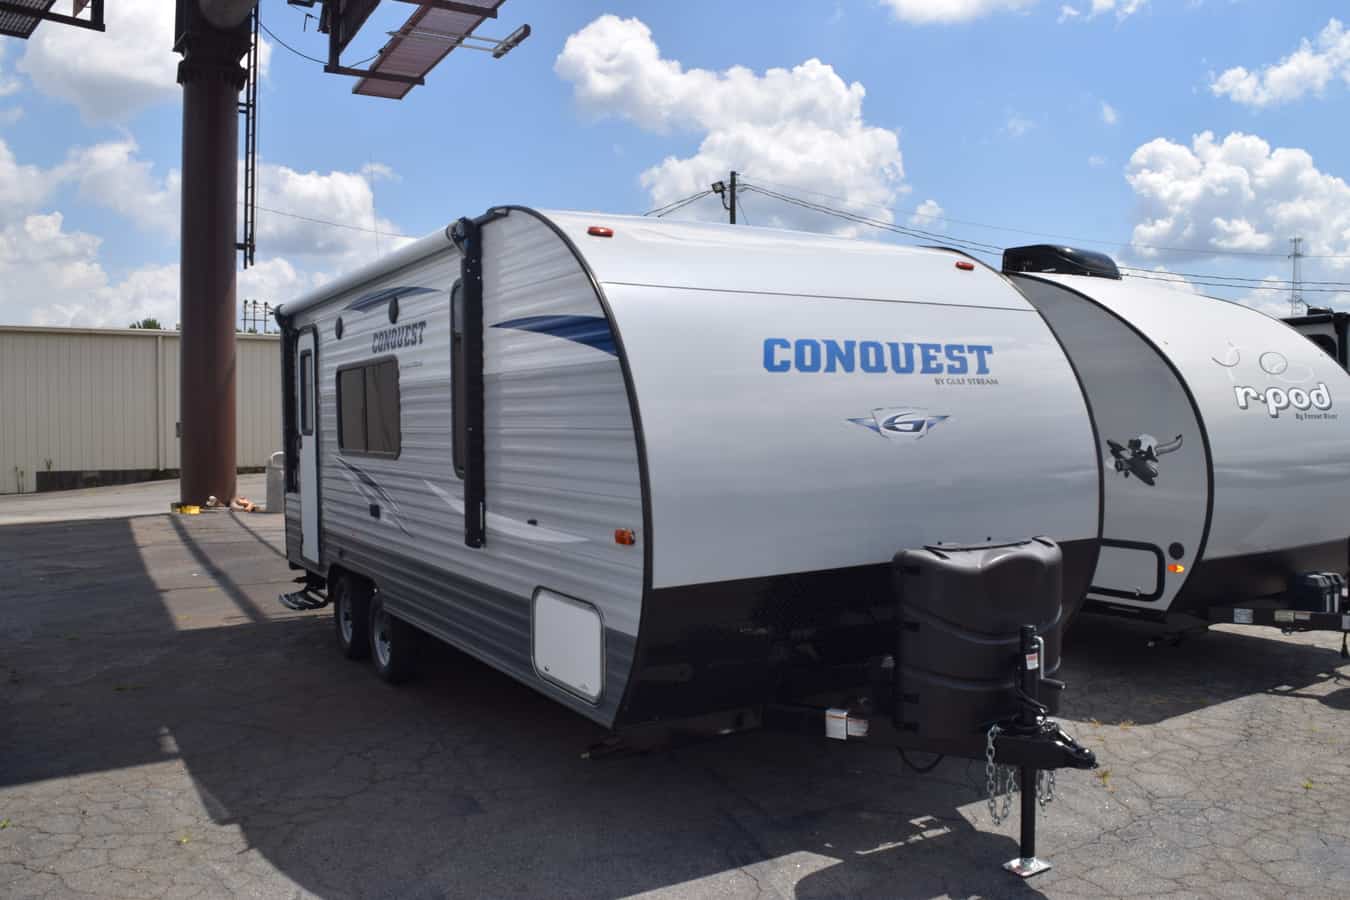 USED 2018 Gulfstream CONQUEST 218MB